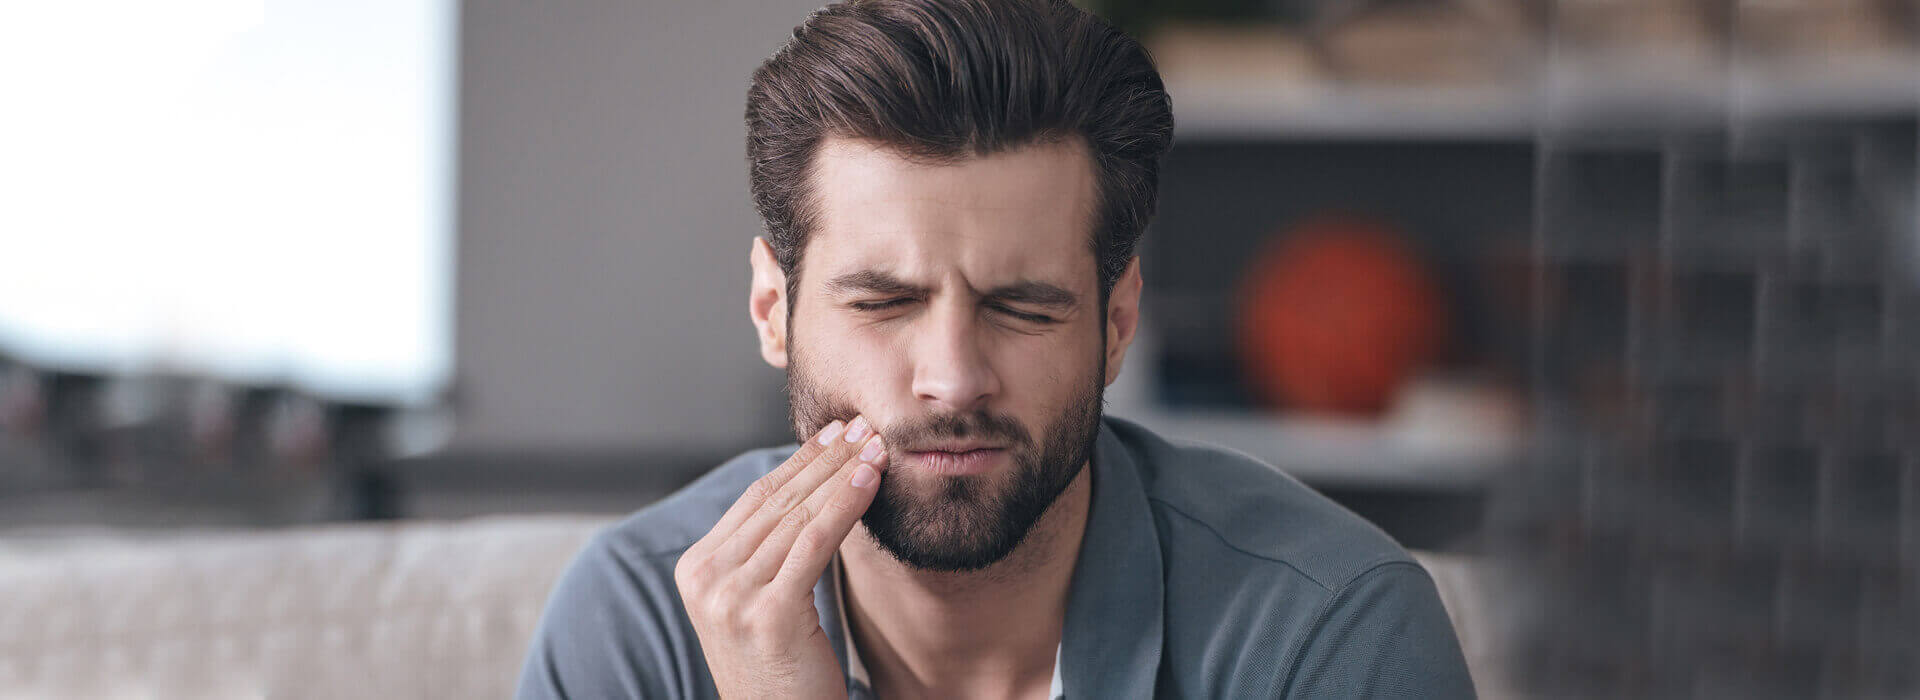 4 Simple Home Remedies to Get Rid of a Toothache